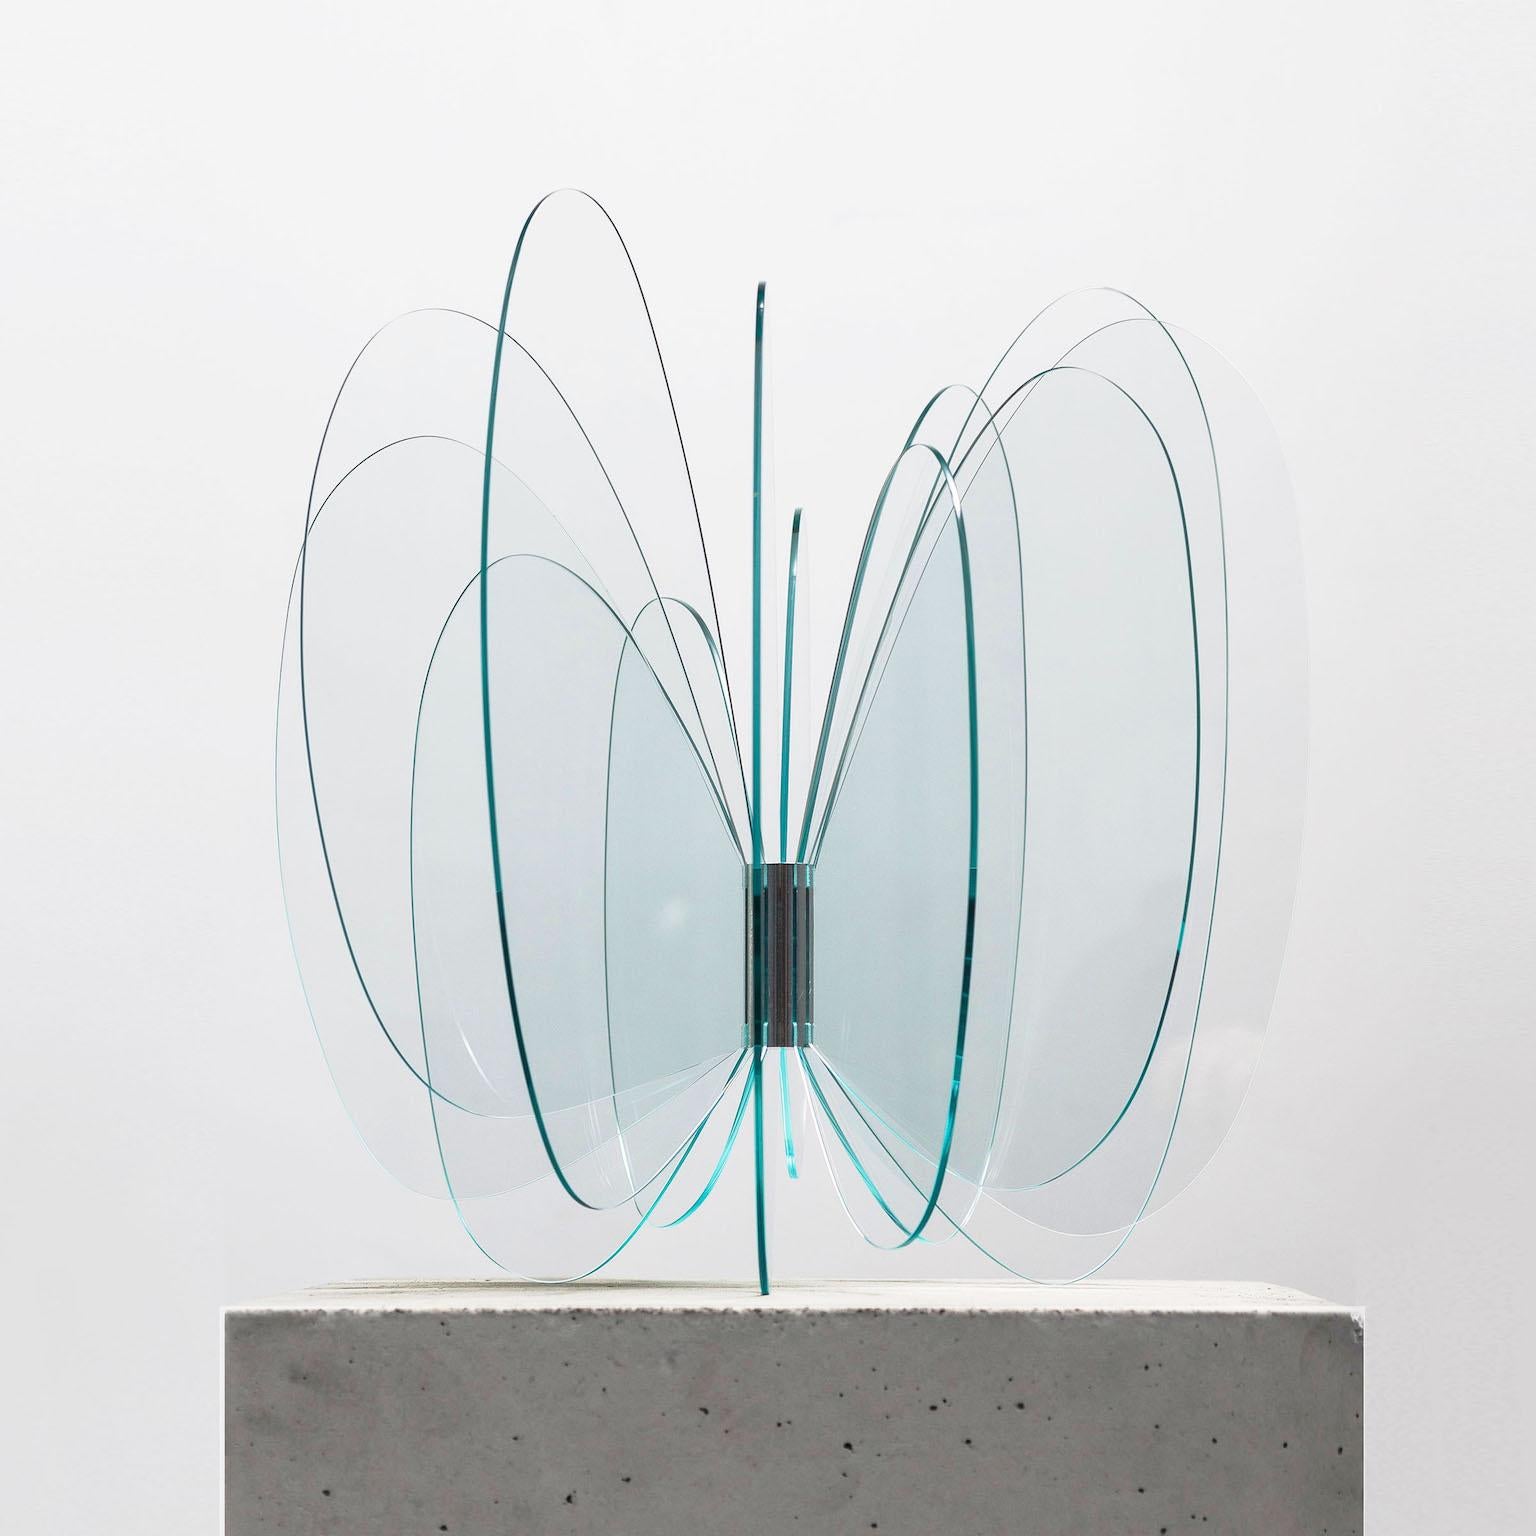 Norman Mooney Abstract Sculpture - "Butterfly Effect No. 3", Organic, Abstract Glass Sculpture, Tabletop Size